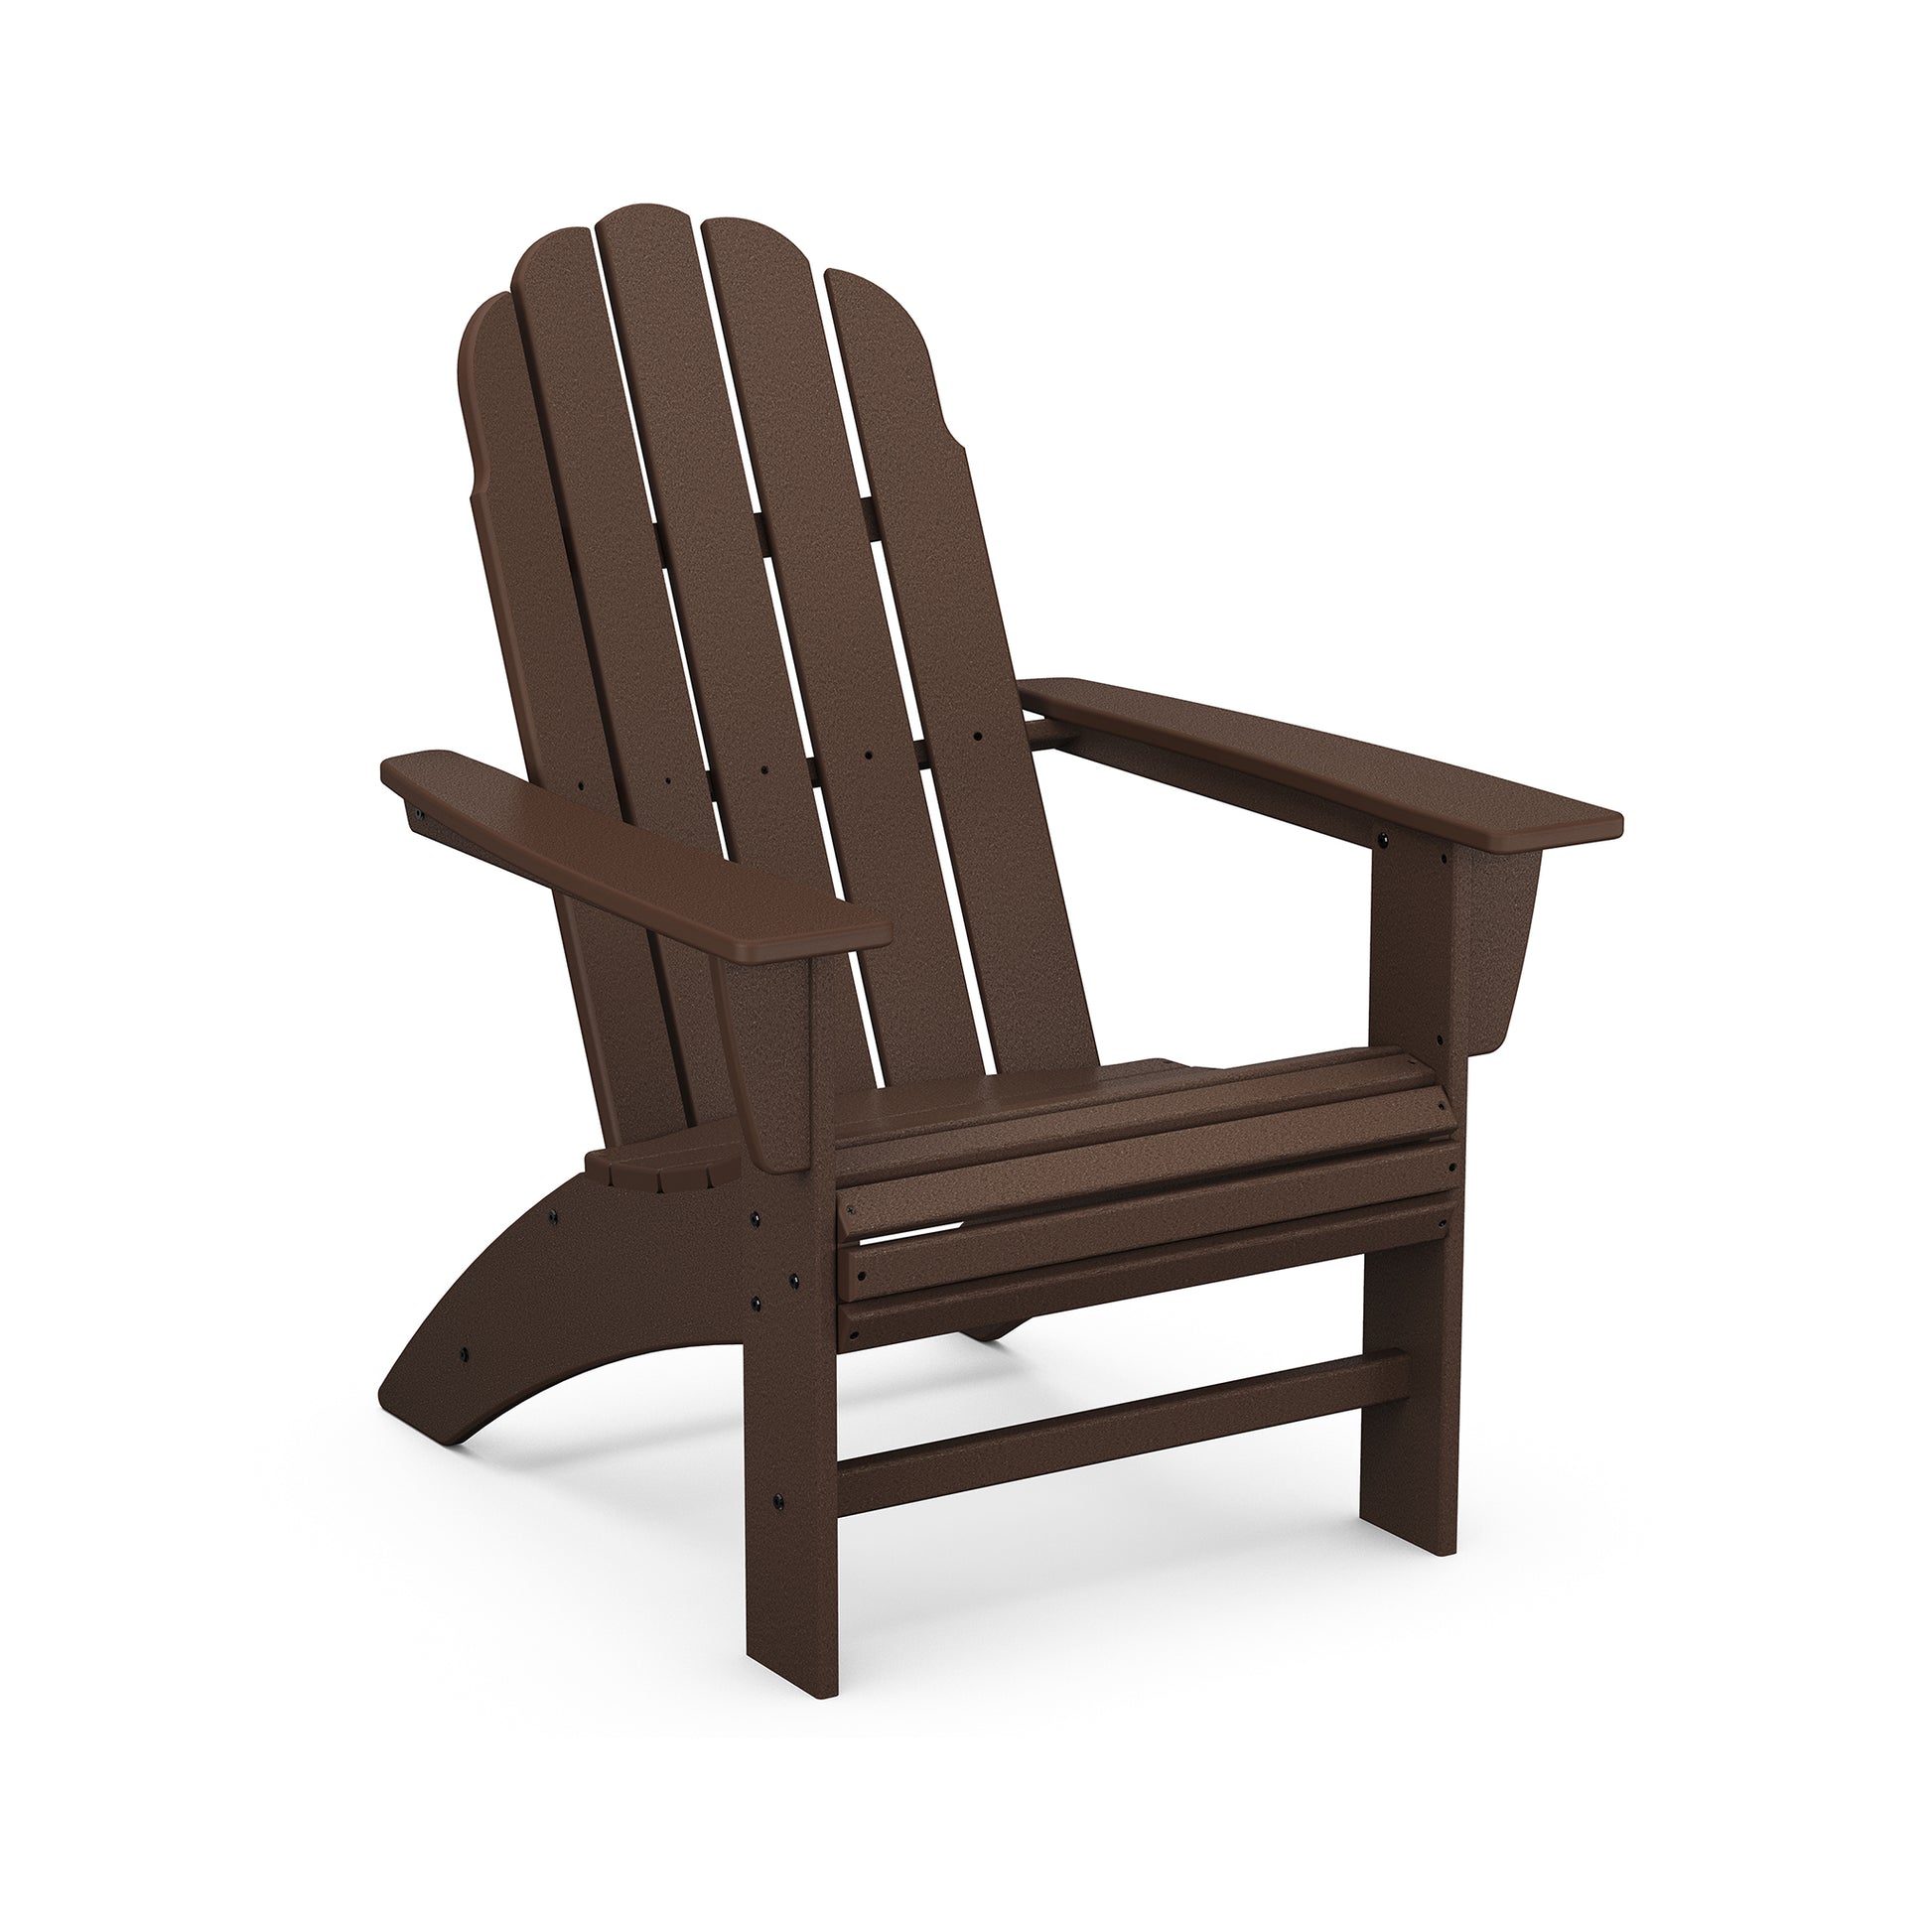 A brown POLYWOOD® Vineyard Curveback Adirondack chair made of synthetic materials, designed with a slatted back and seat, showcasing a contoured design for comfort, set against a plain white background.